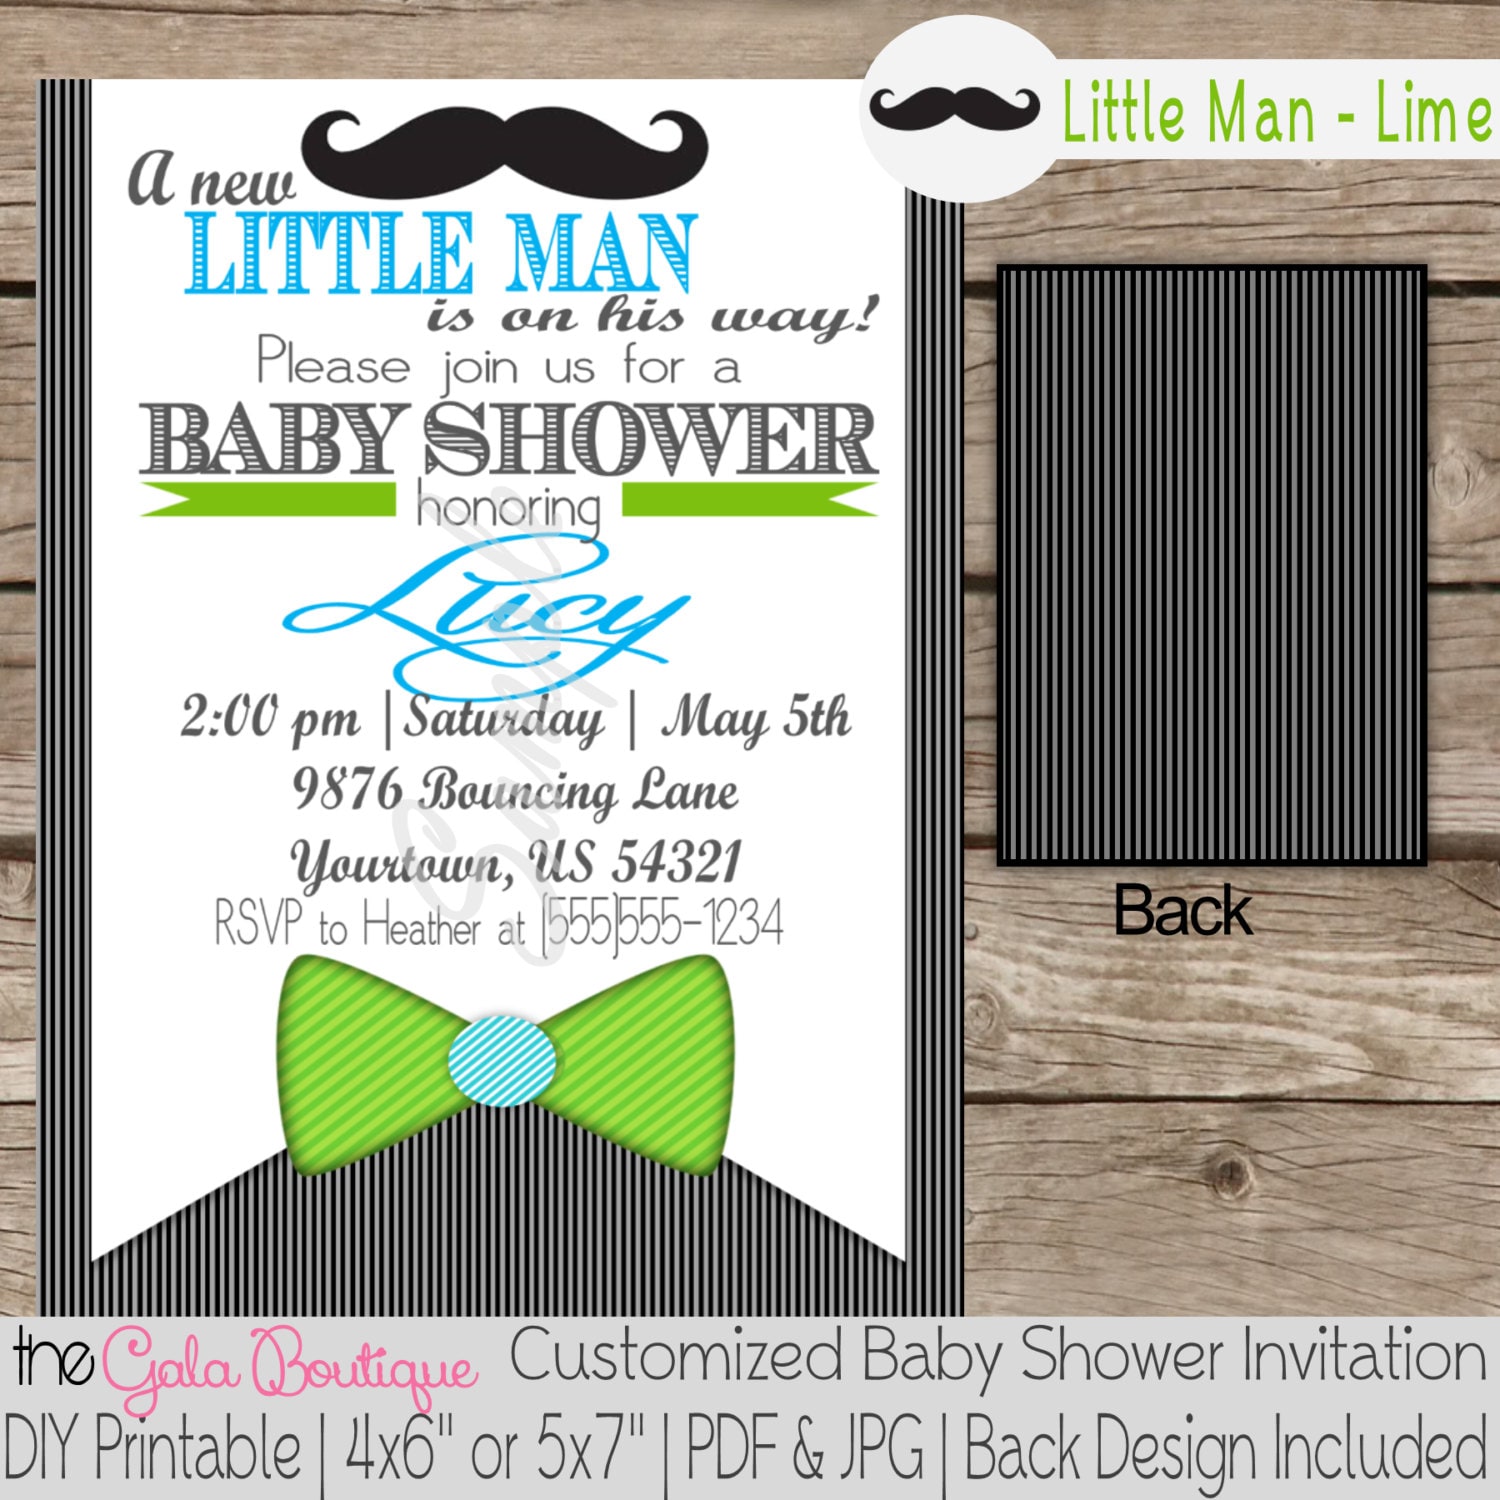 Little Man Baby Shower Invitation Digital DIY by TheGalaBoutique